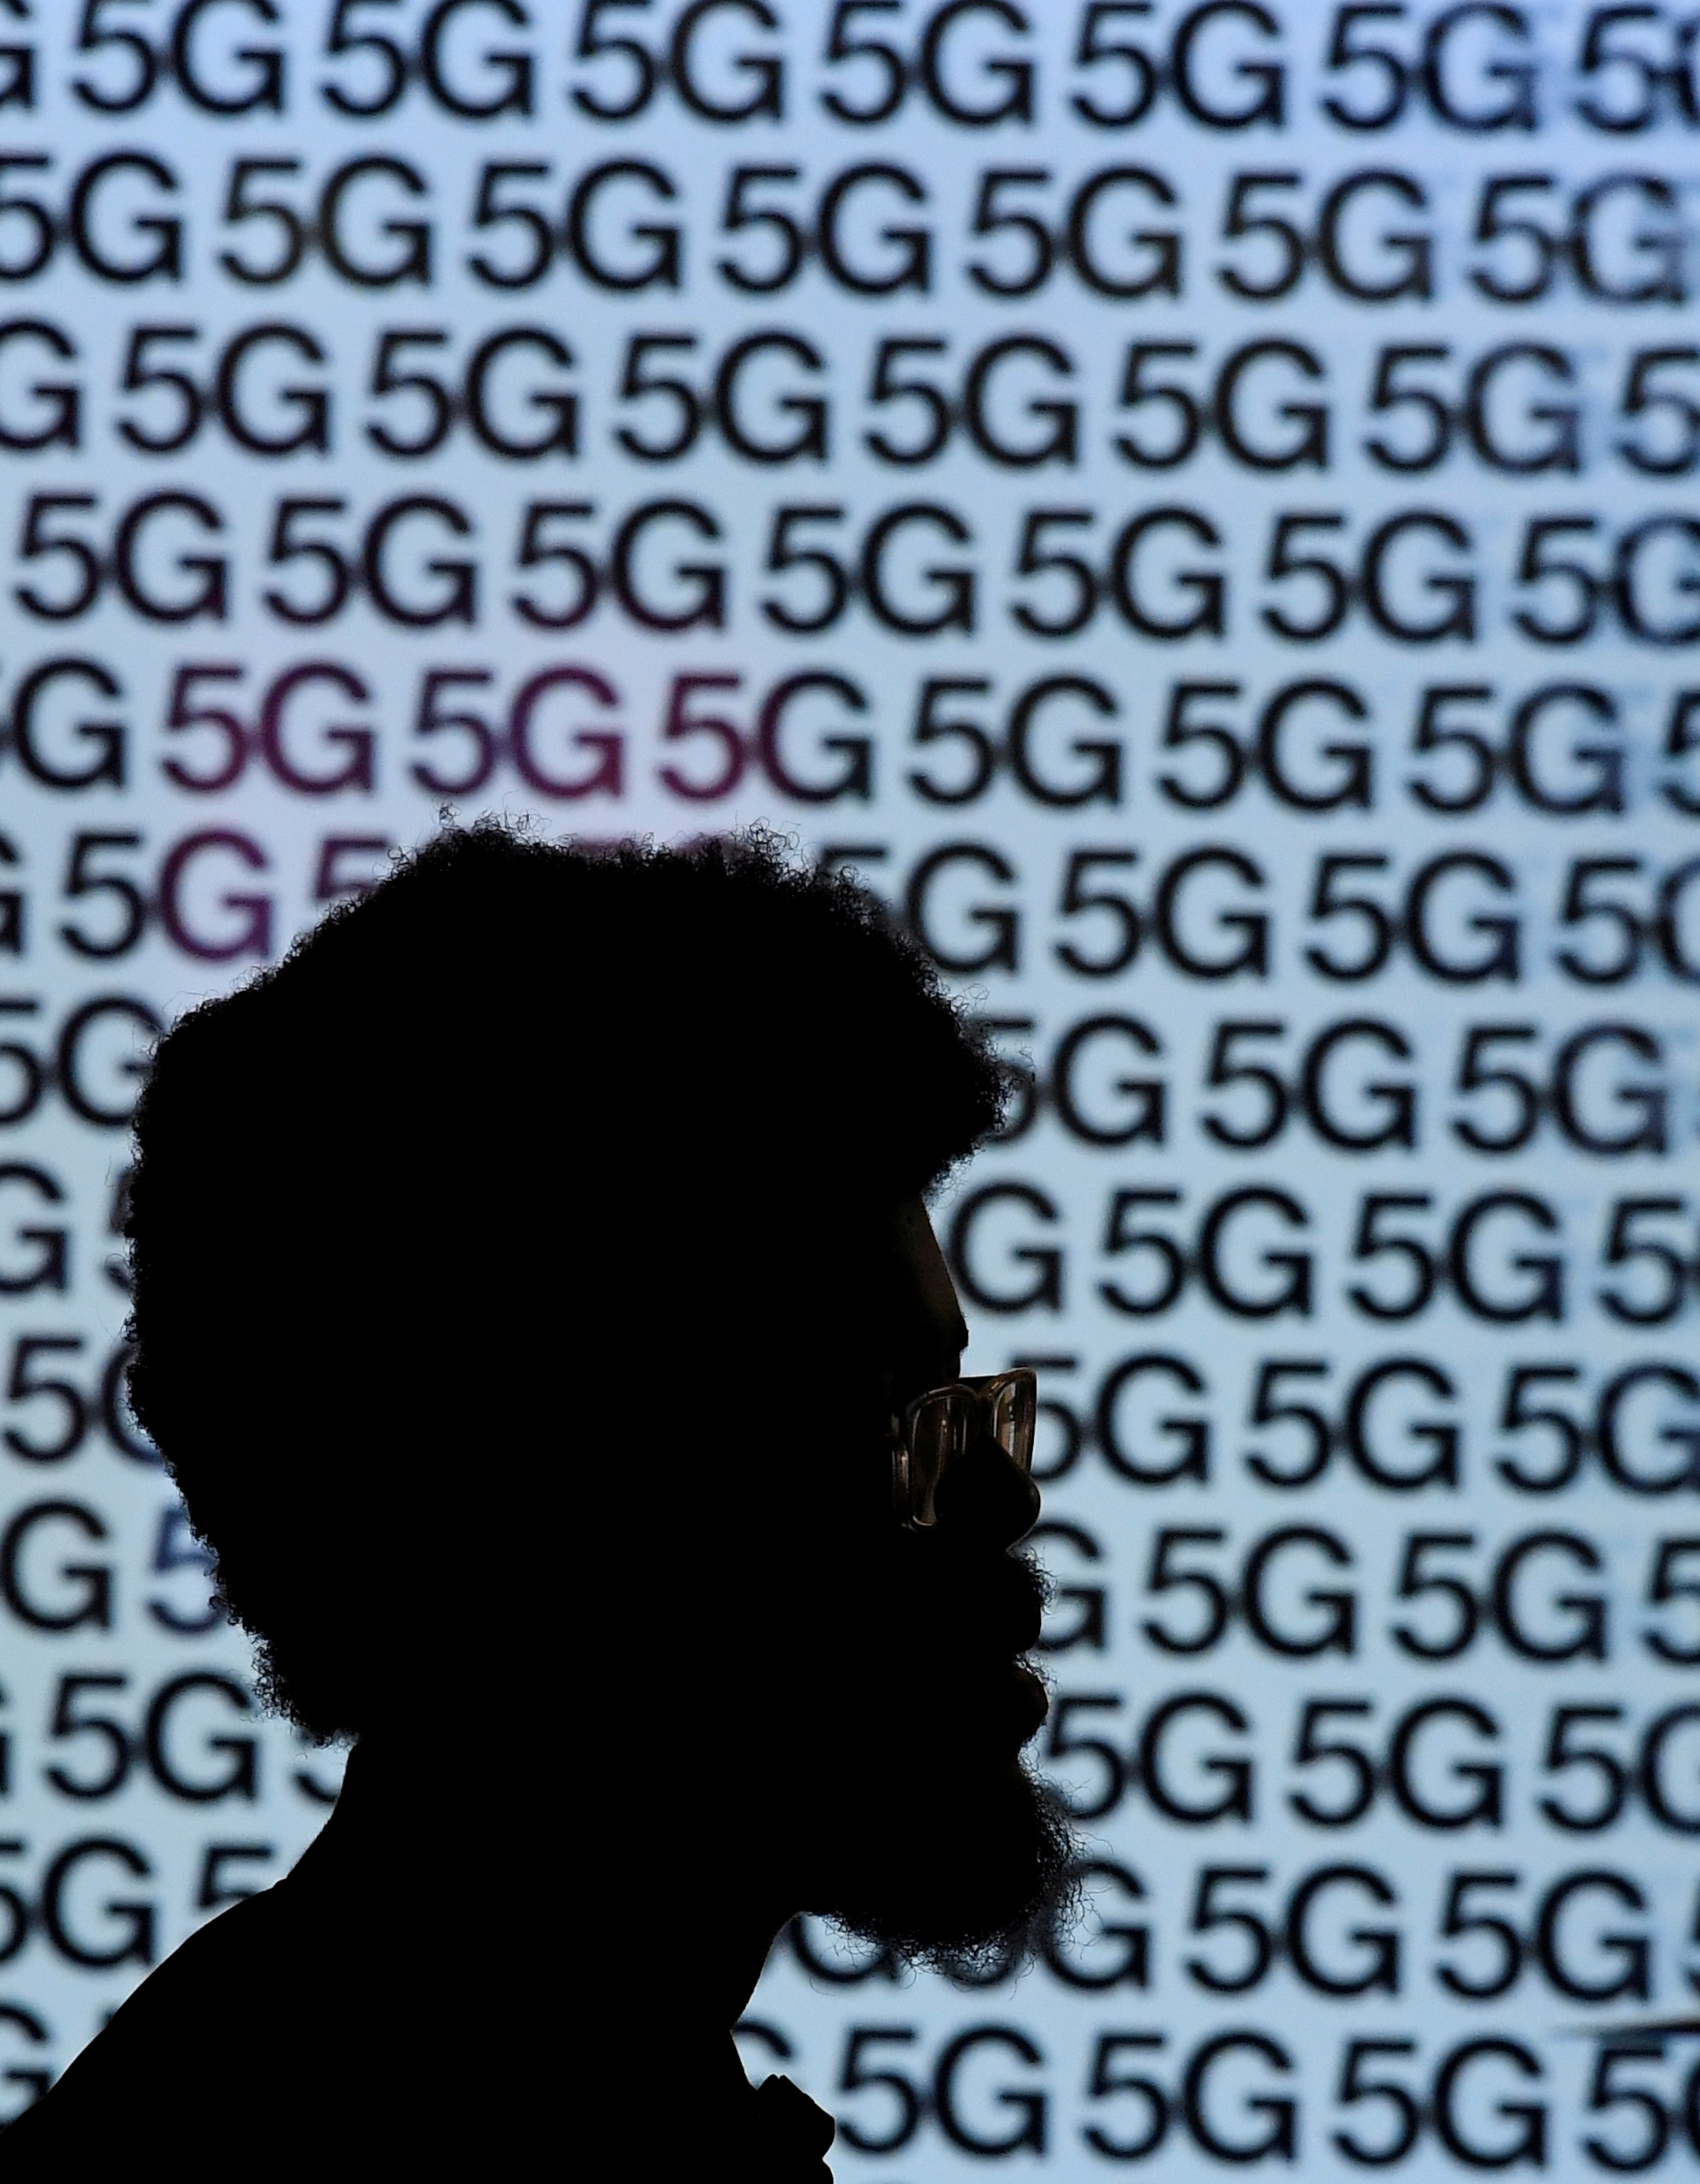 A man walks past an advertisement promoting the 5G data network at a mobile phone store in London, Britain, January 28, 2020. REUTERS/Toby Melville/File Photo